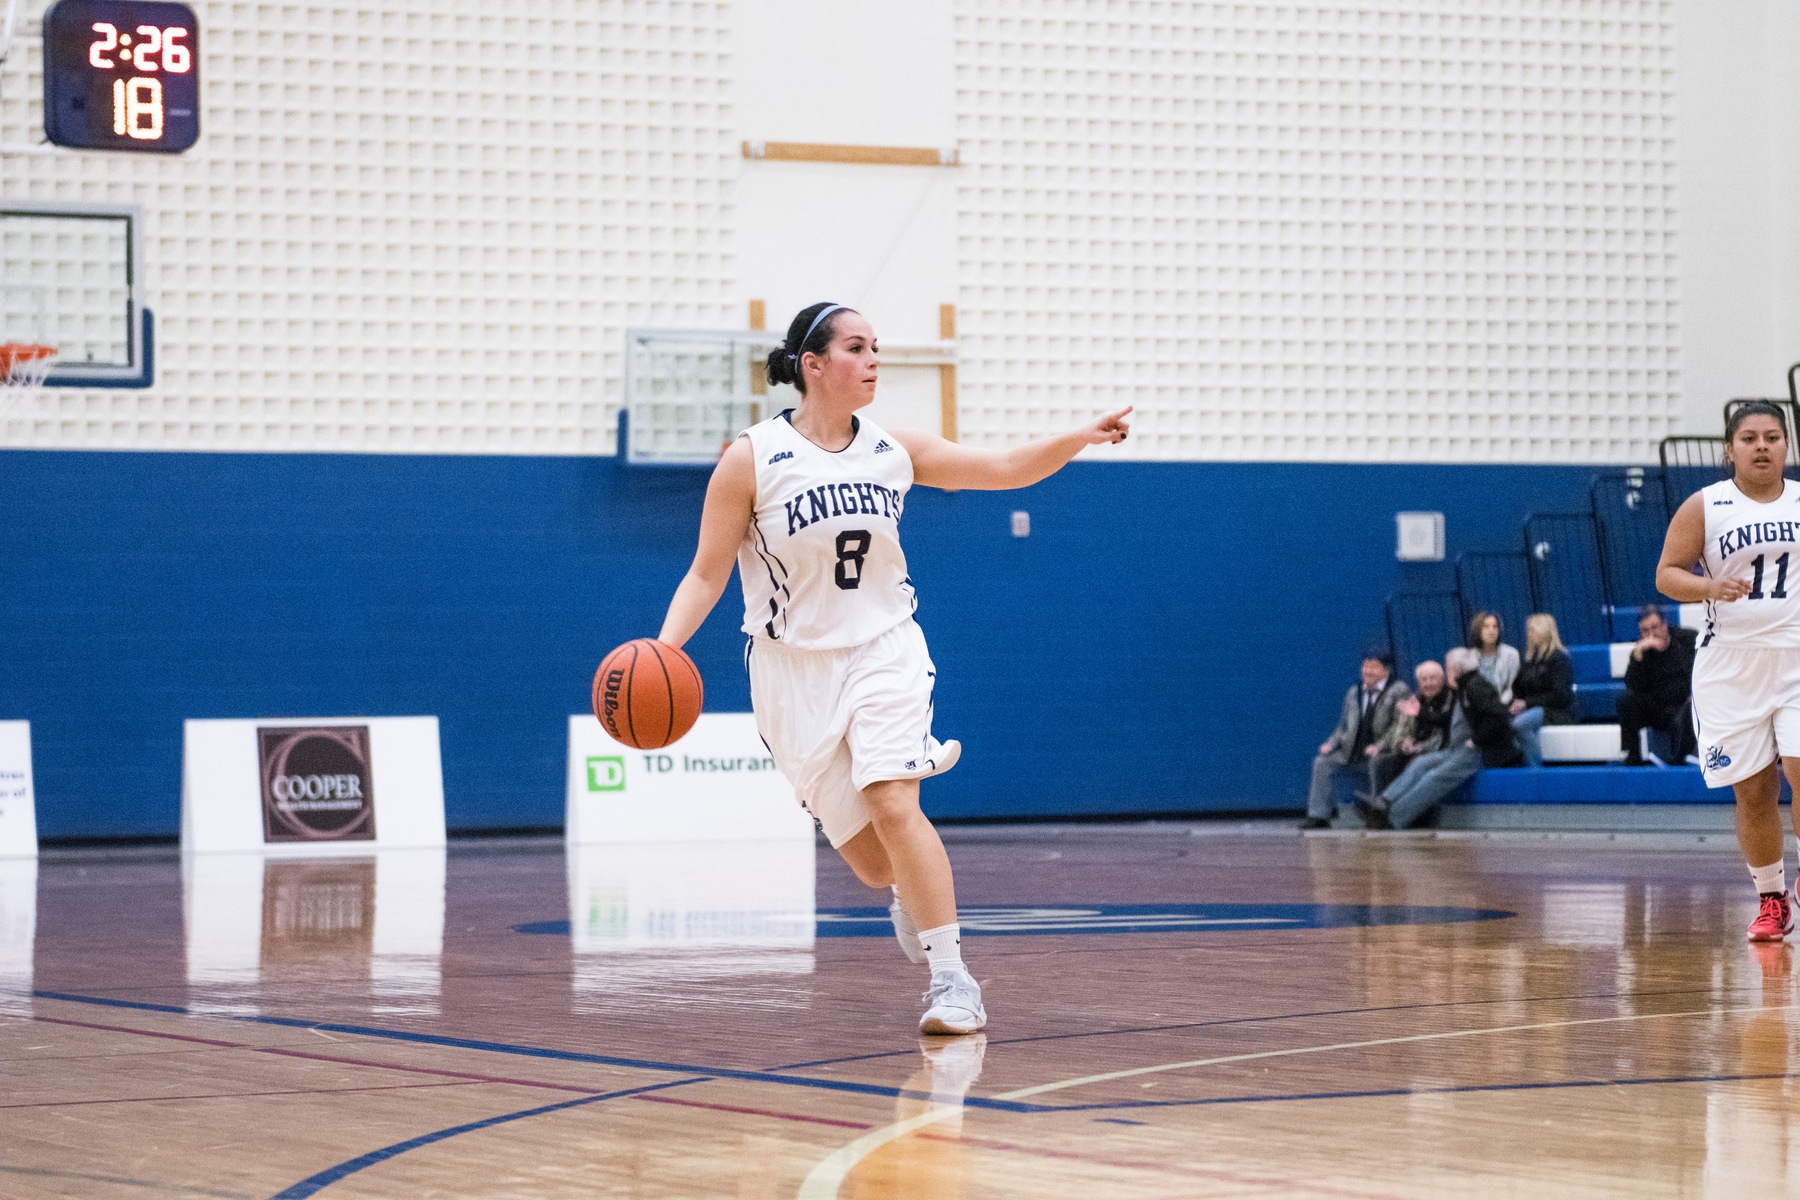 RECAP: Ingribelli notches season best 27 points to pace Knights to victory